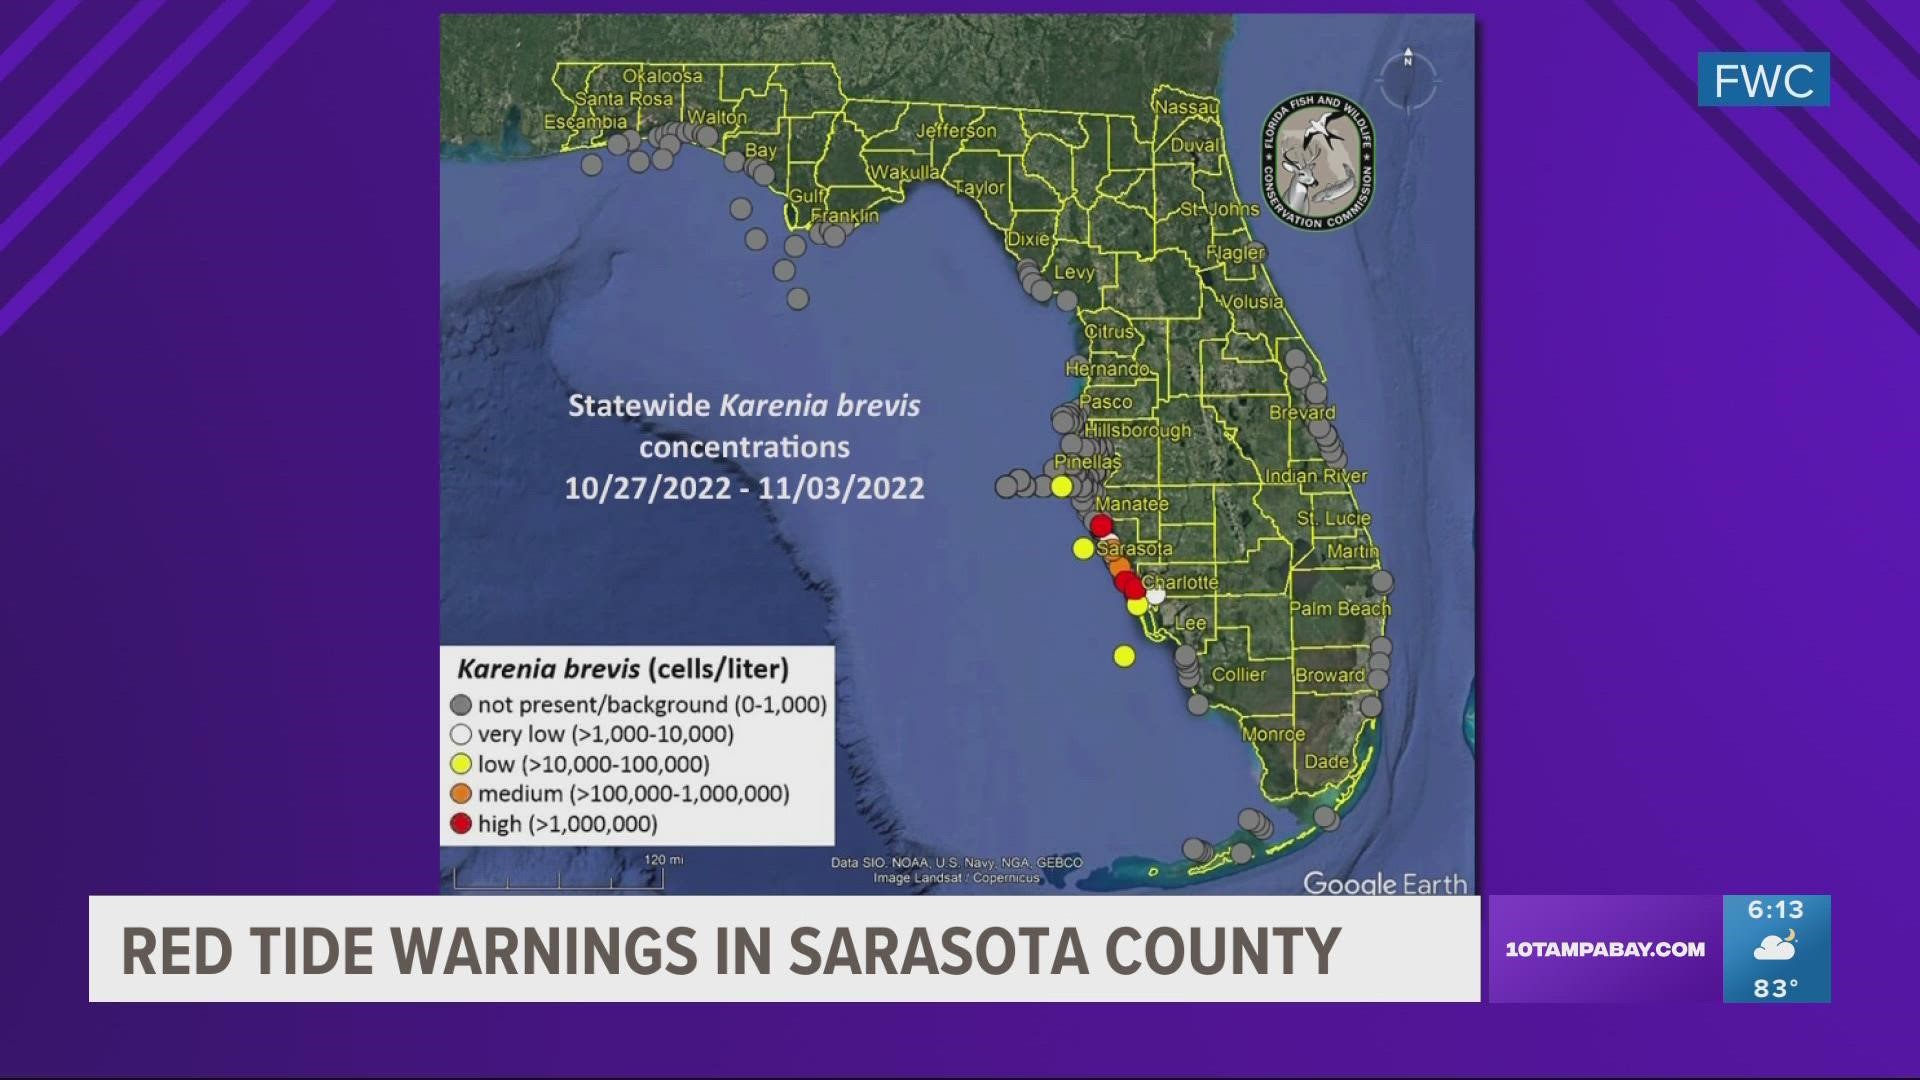 There have also been reports of fish kill suspected to be related to red tide in Sarasota County.